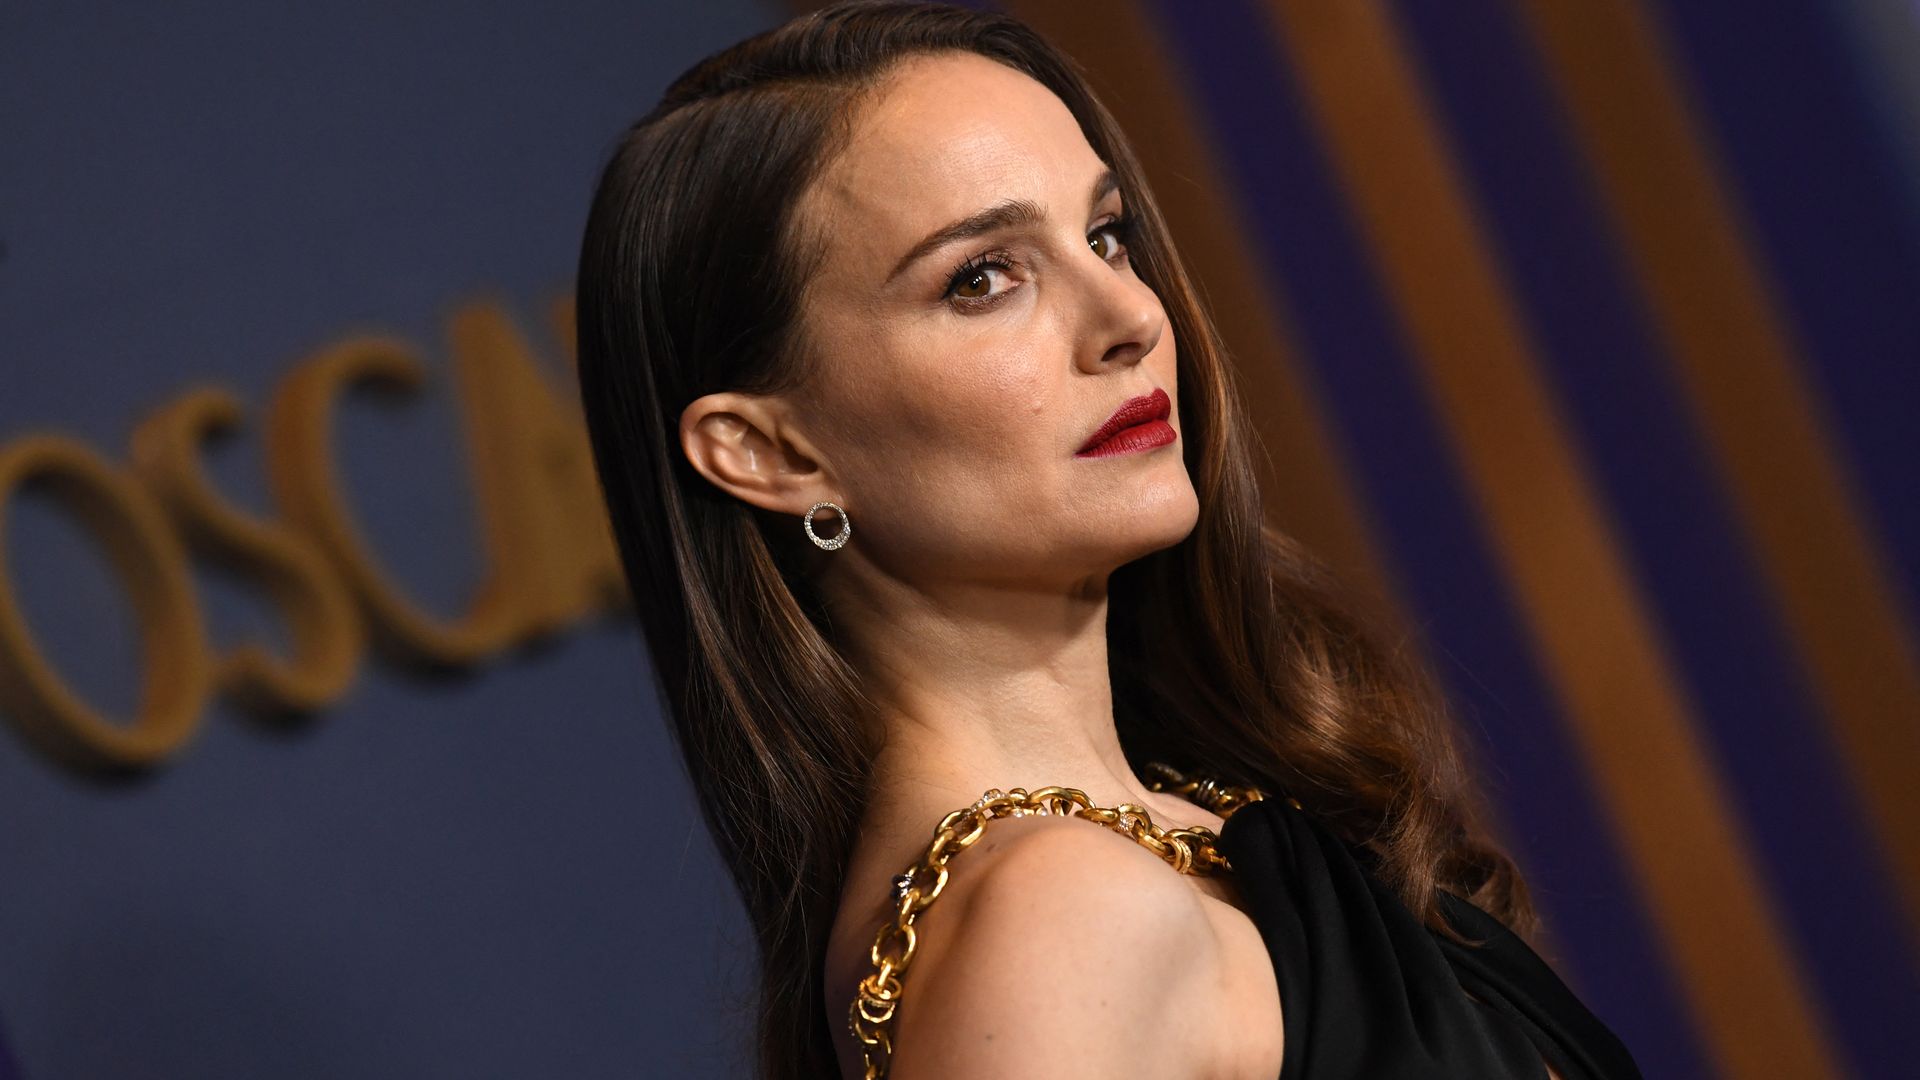 Natalie Portman turns heads in revealing lacy dress - see photos